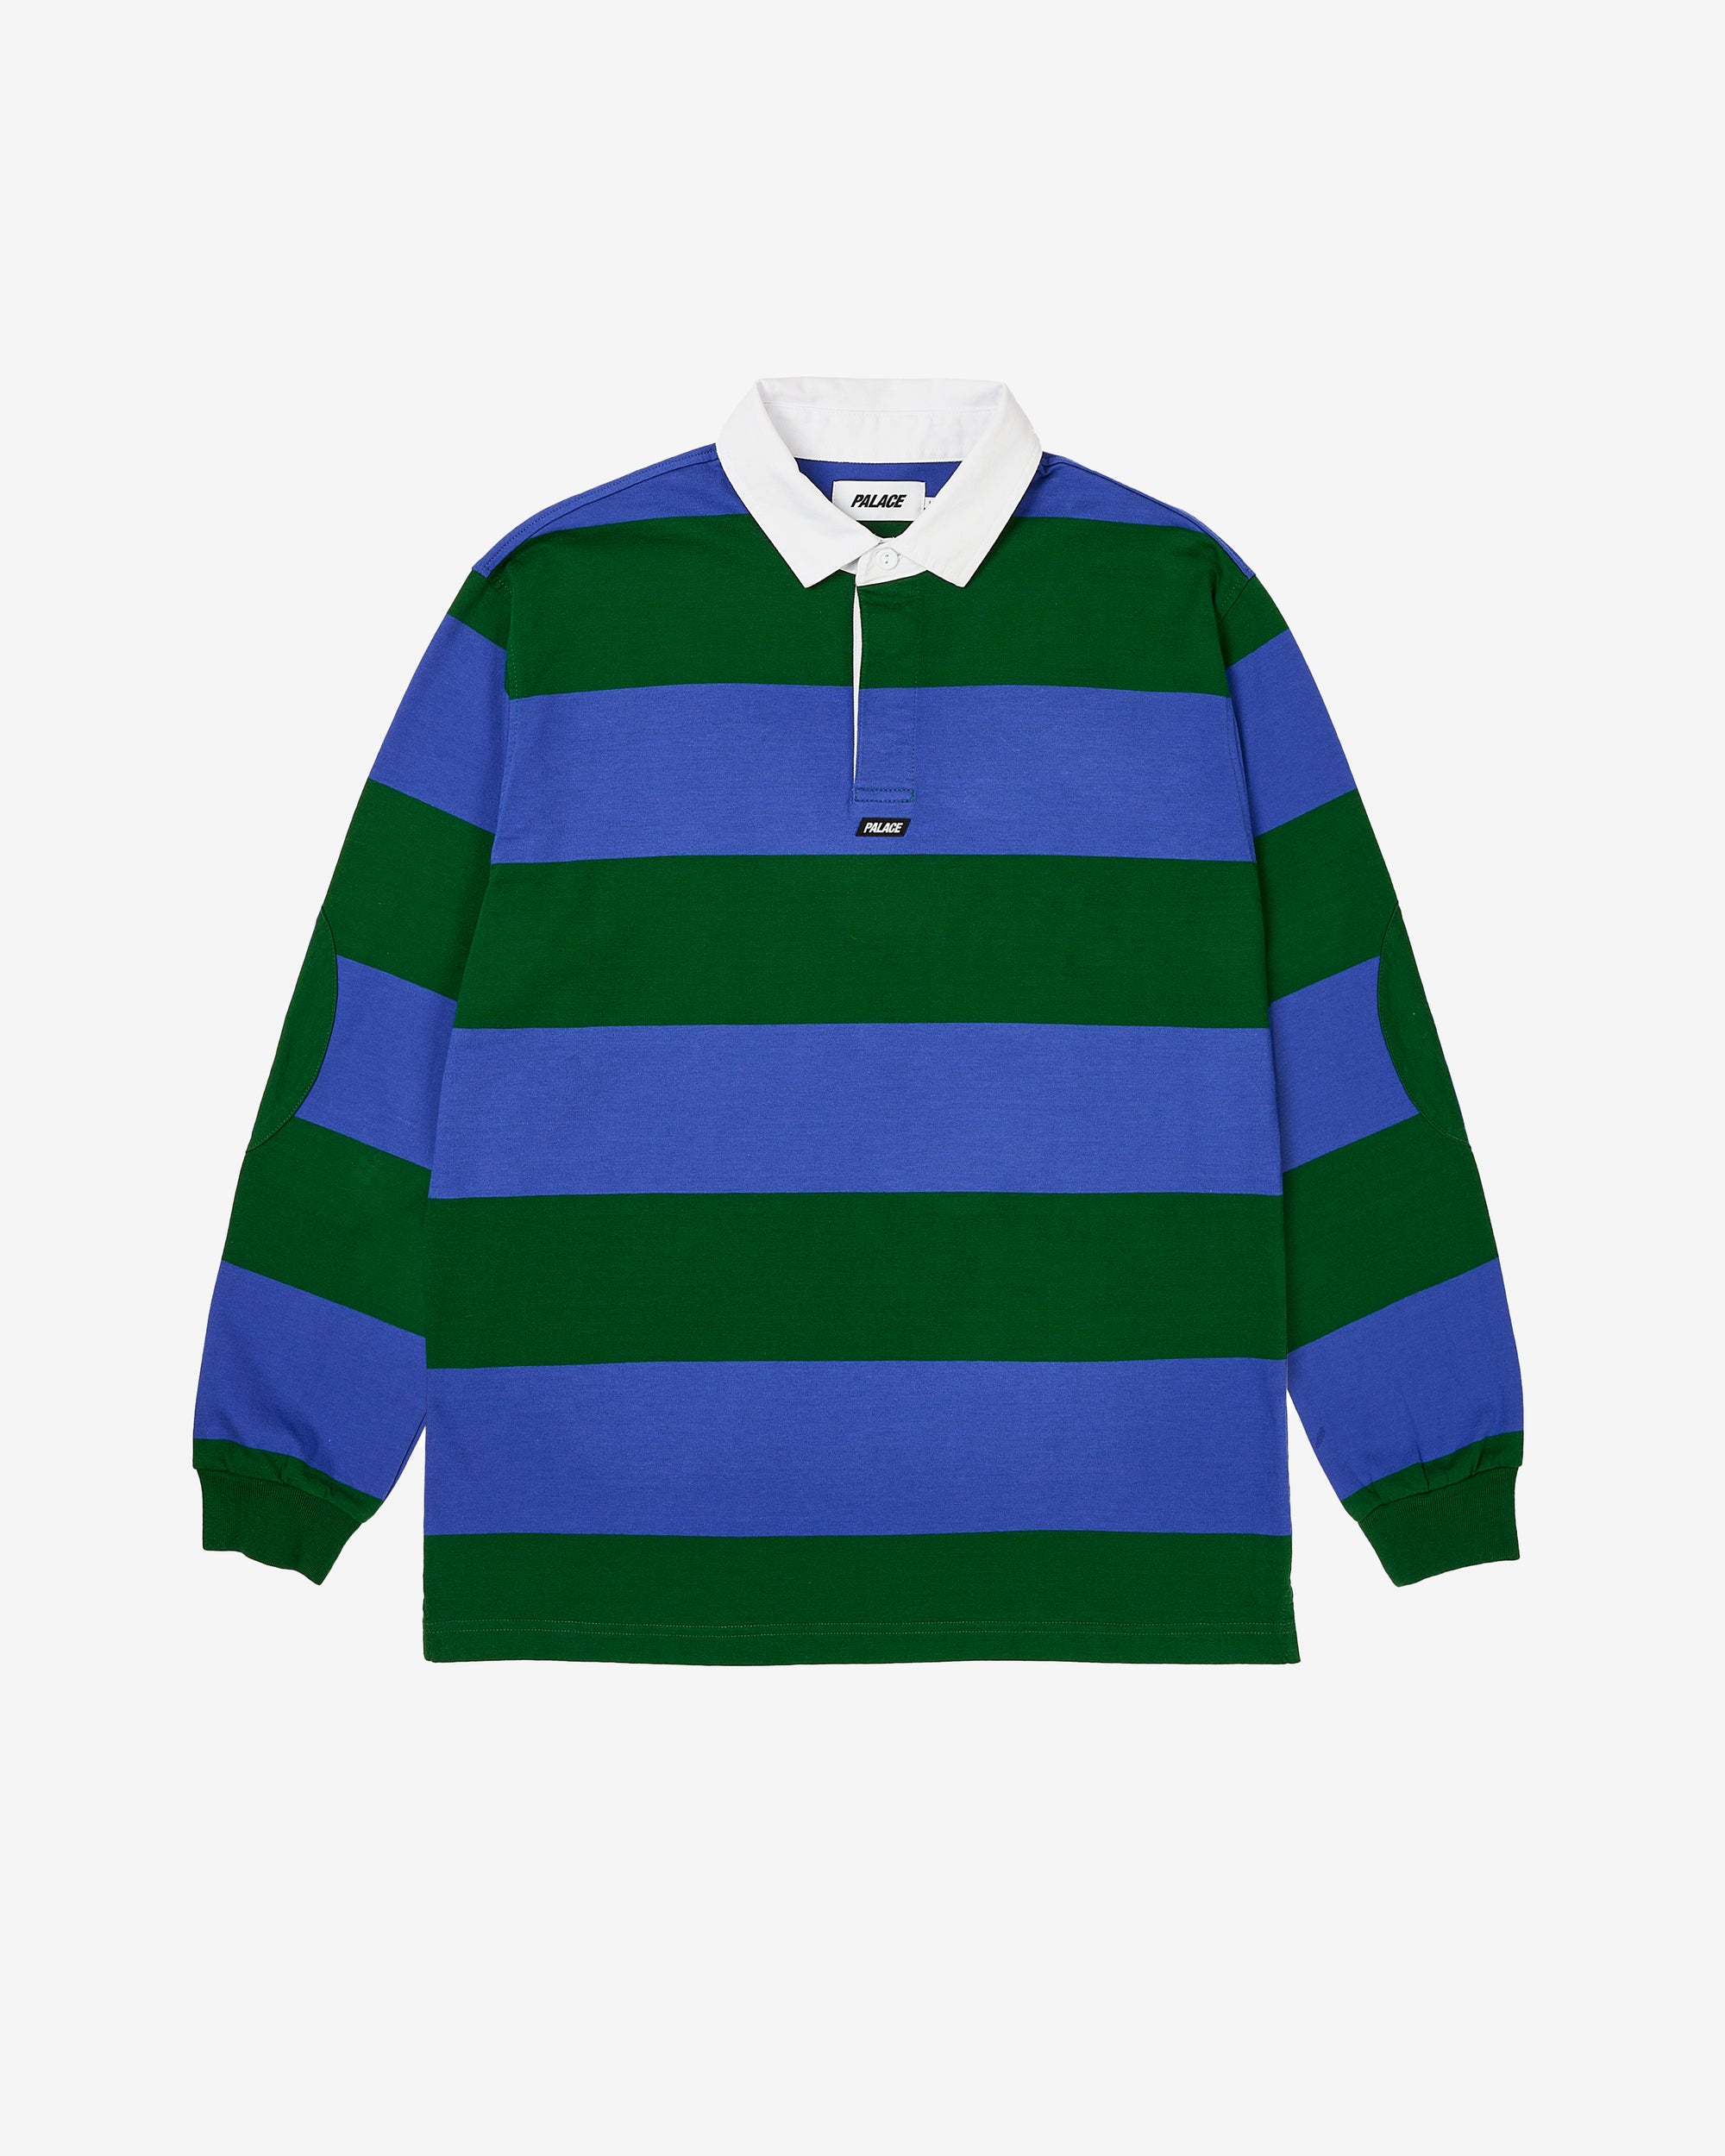 Palace - Men's Elbow Stripe Rugby - (Blue/Green) view 1